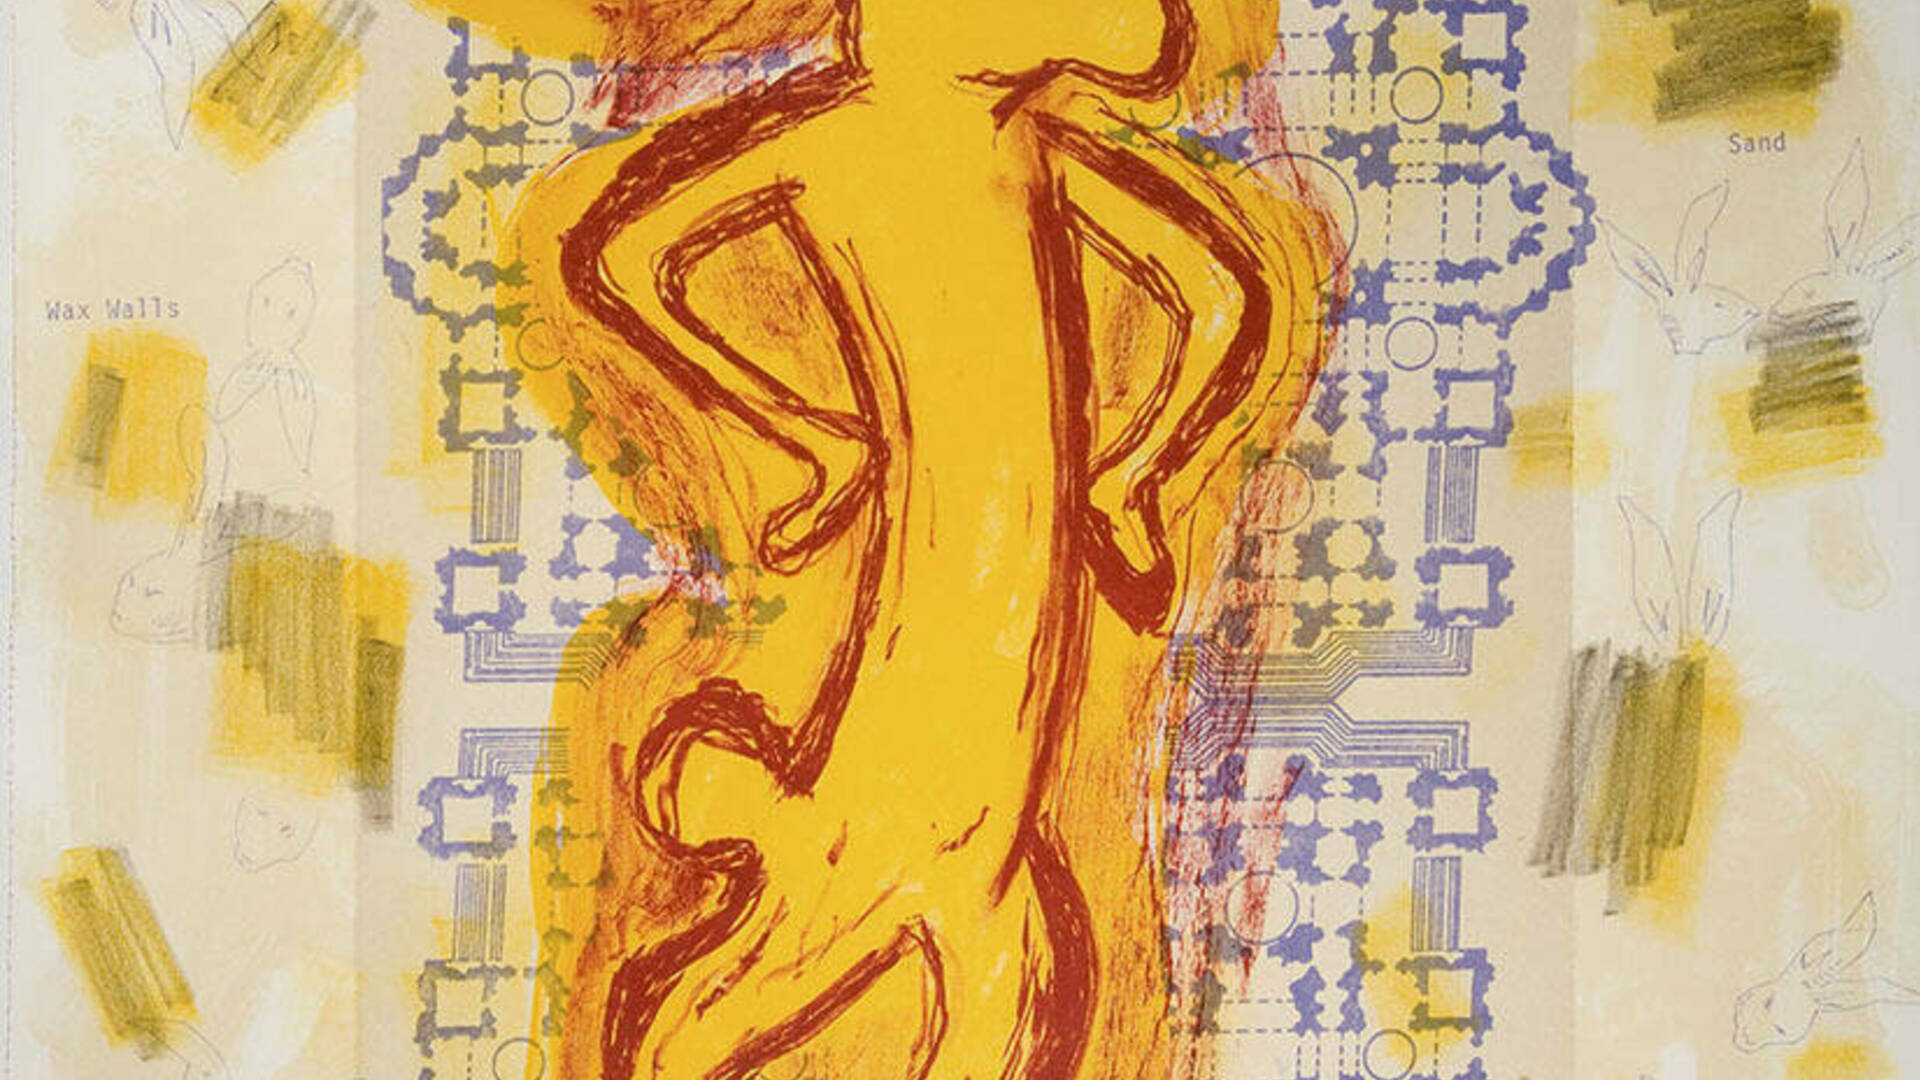 Jaune Quick-to-See Smith (American, b. 1940), Tribe/Community from the Survival Series, 1996, lithograph. Acquired with funds provided by the Humana Foundation Endowment for American Art, 2008.044.003